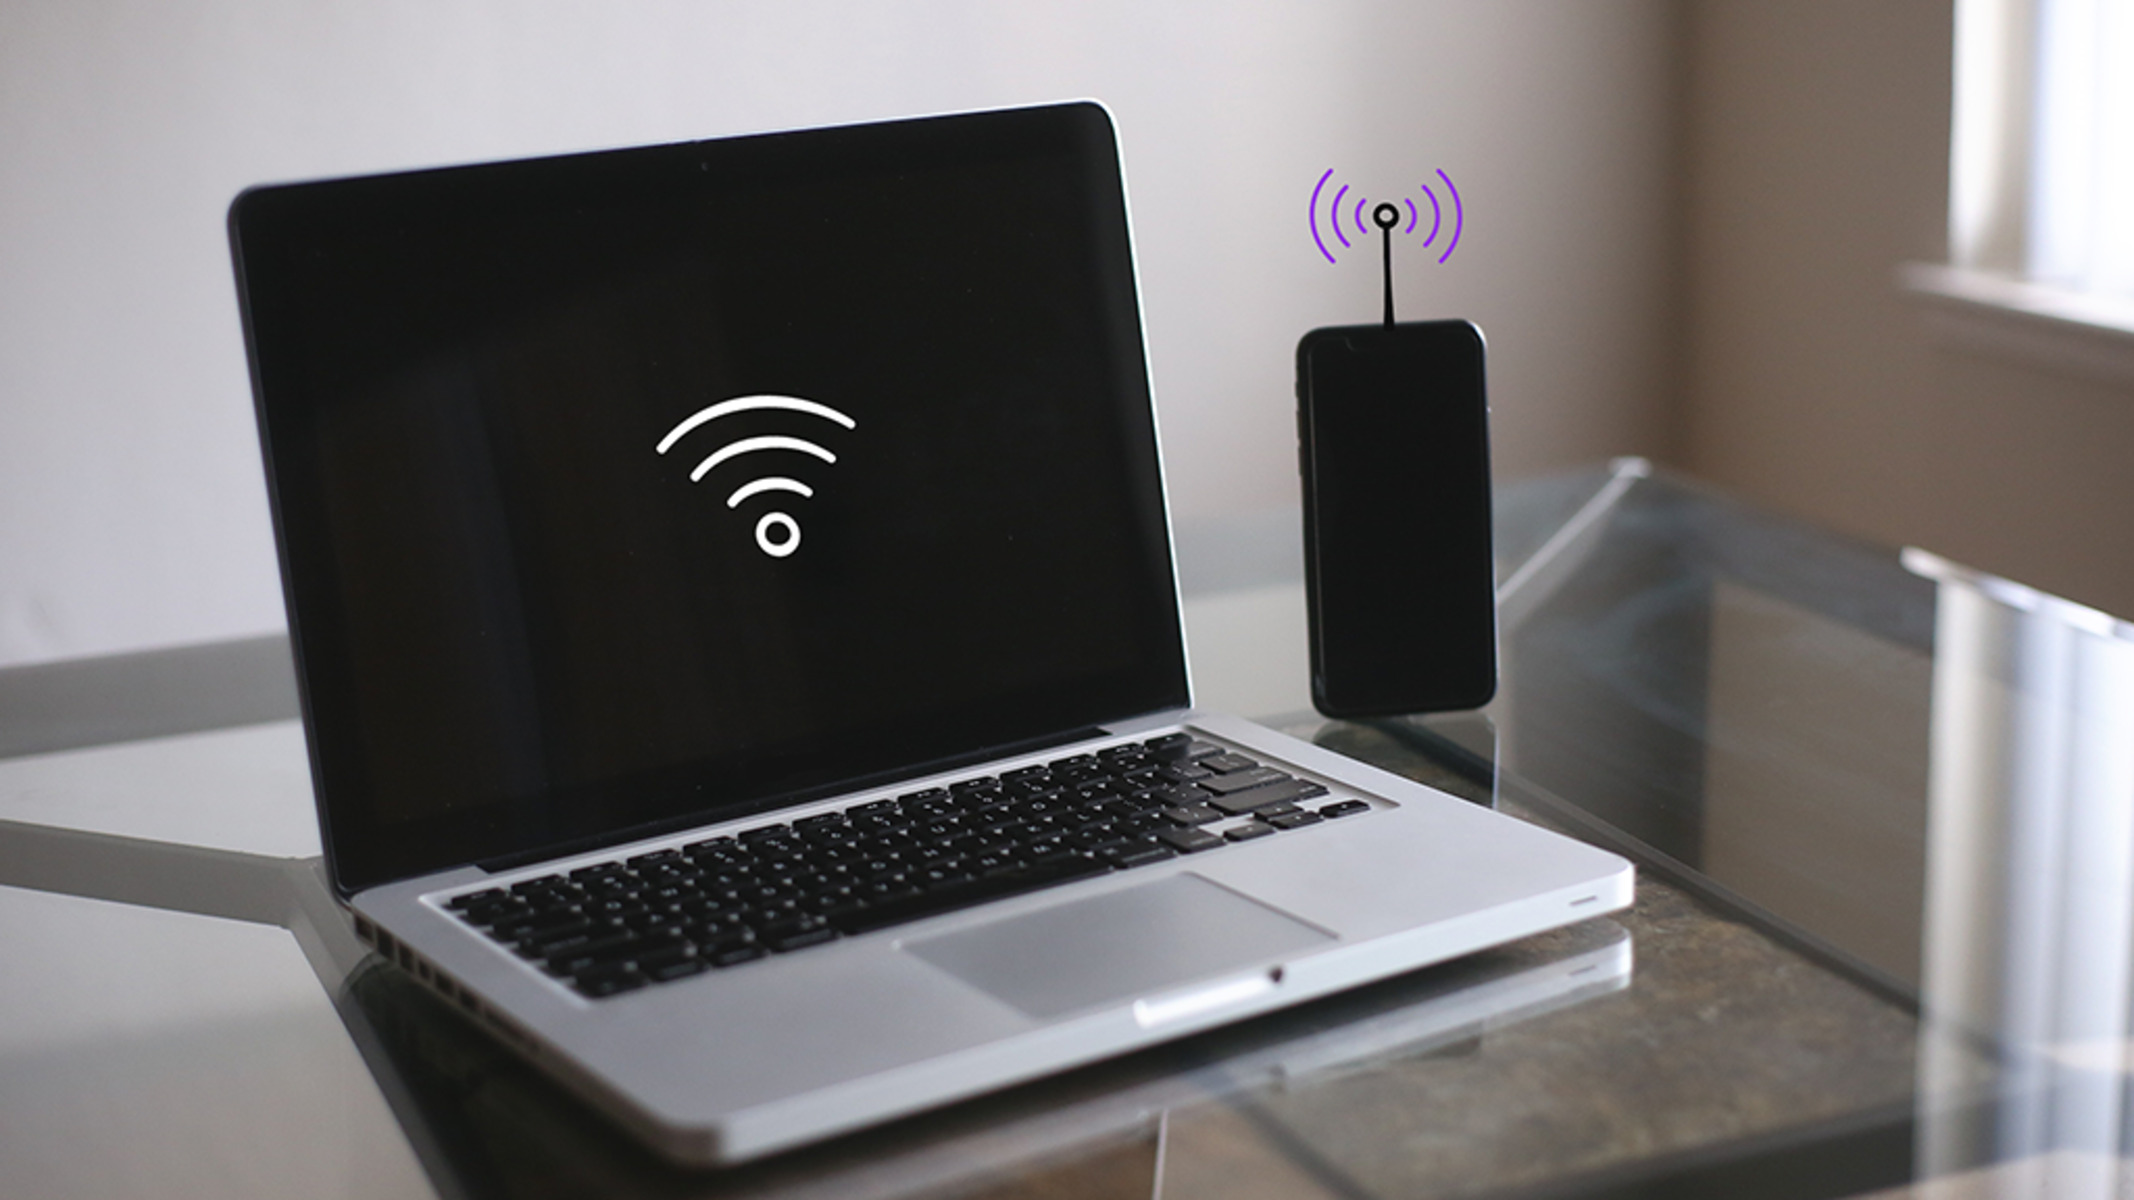 connecting-your-iphone-hotspot-to-laptop-step-by-step